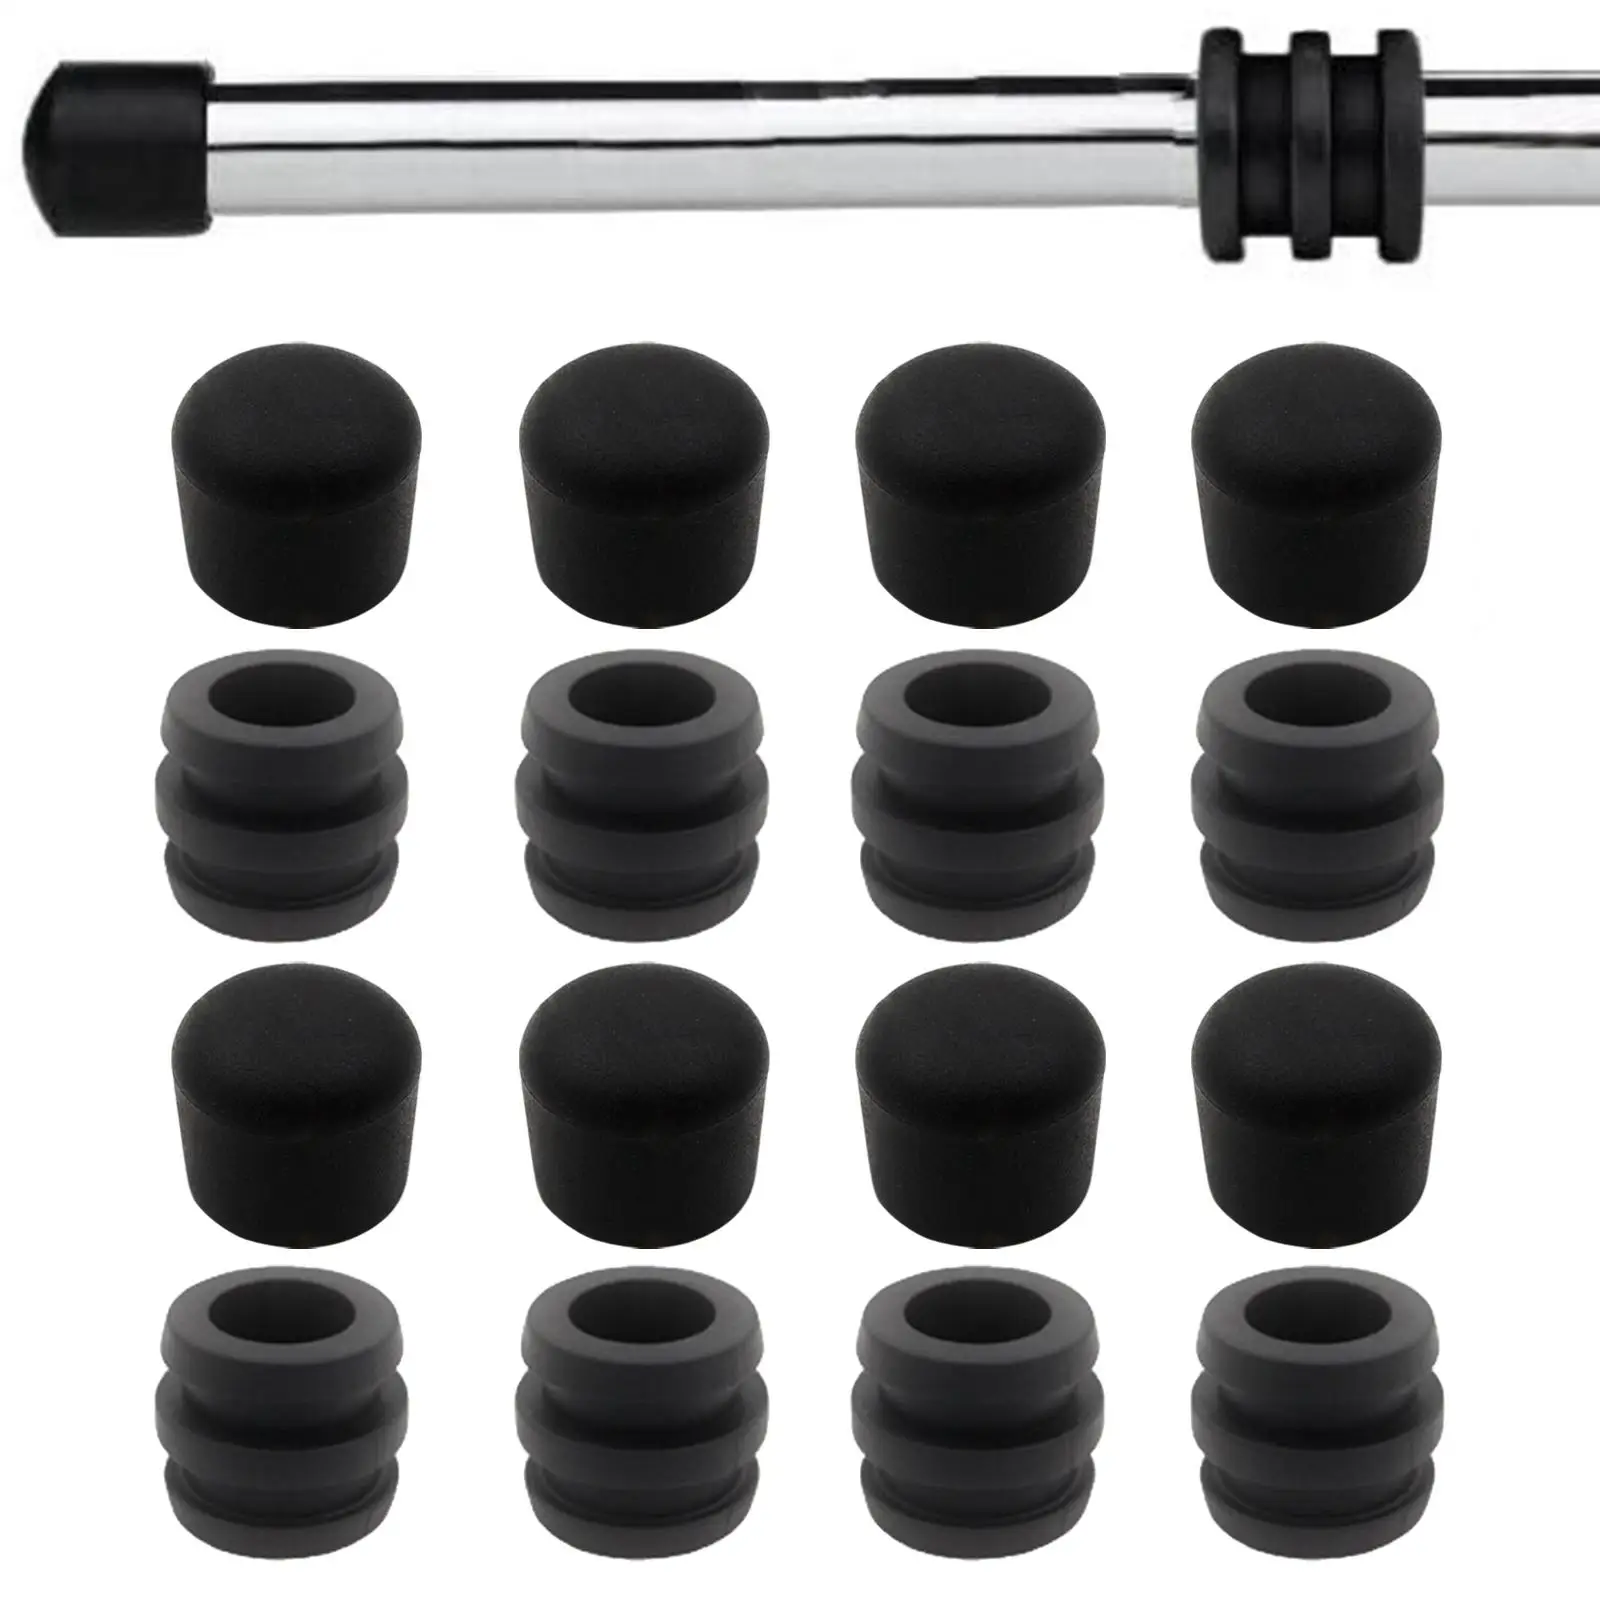 Rod Bumpers End Caps Accessories, Foosball Ball Replacement, Fussball Standard